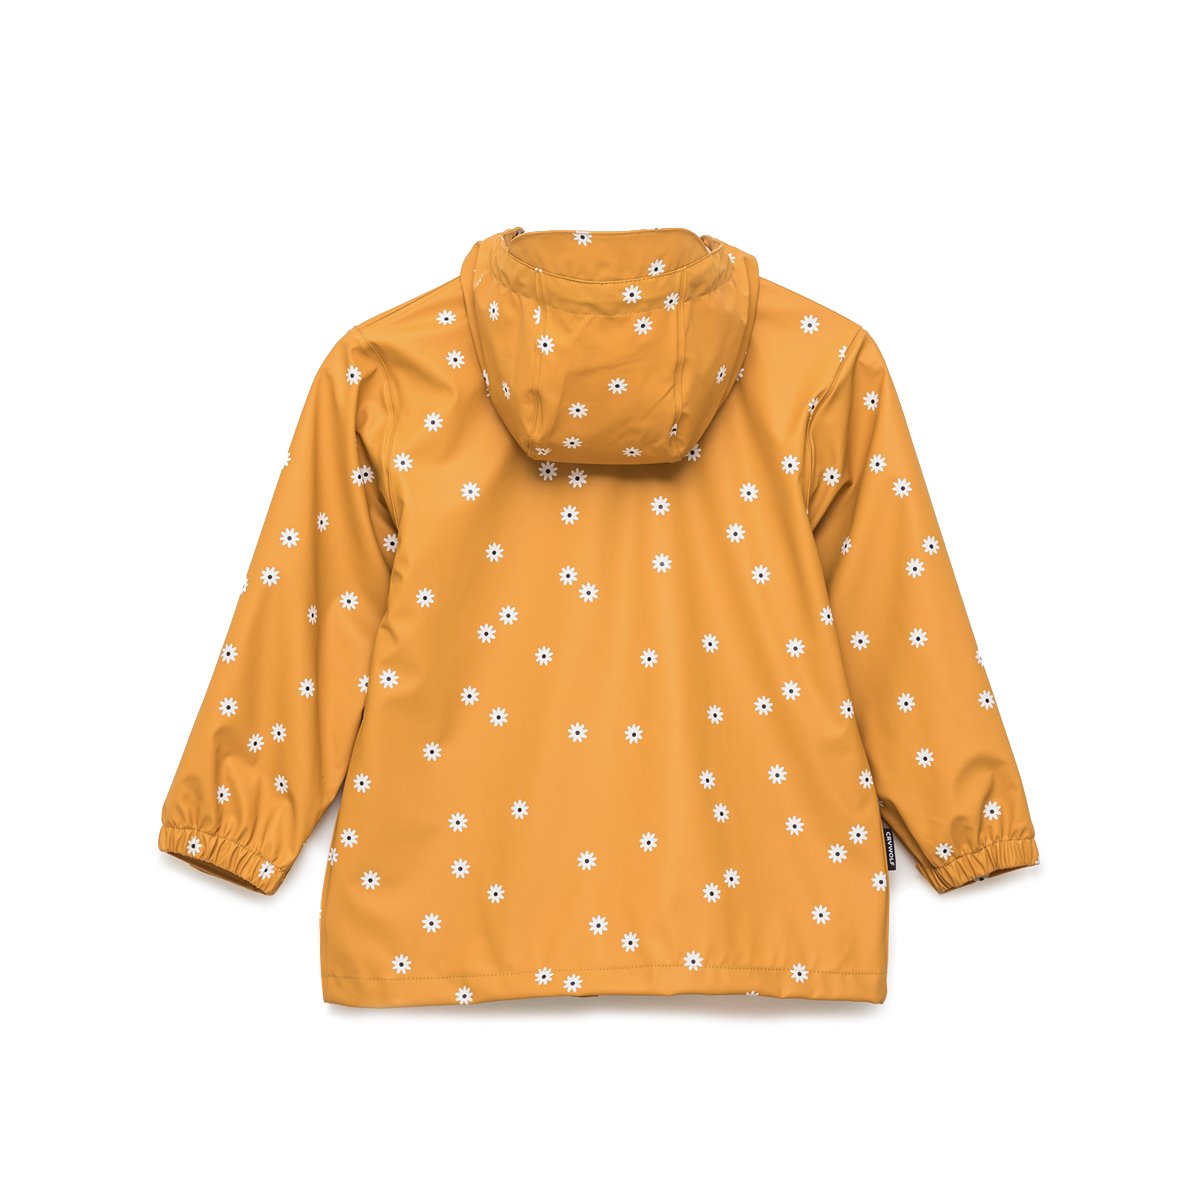 Waterproof kids jacket yellow with white flowers back